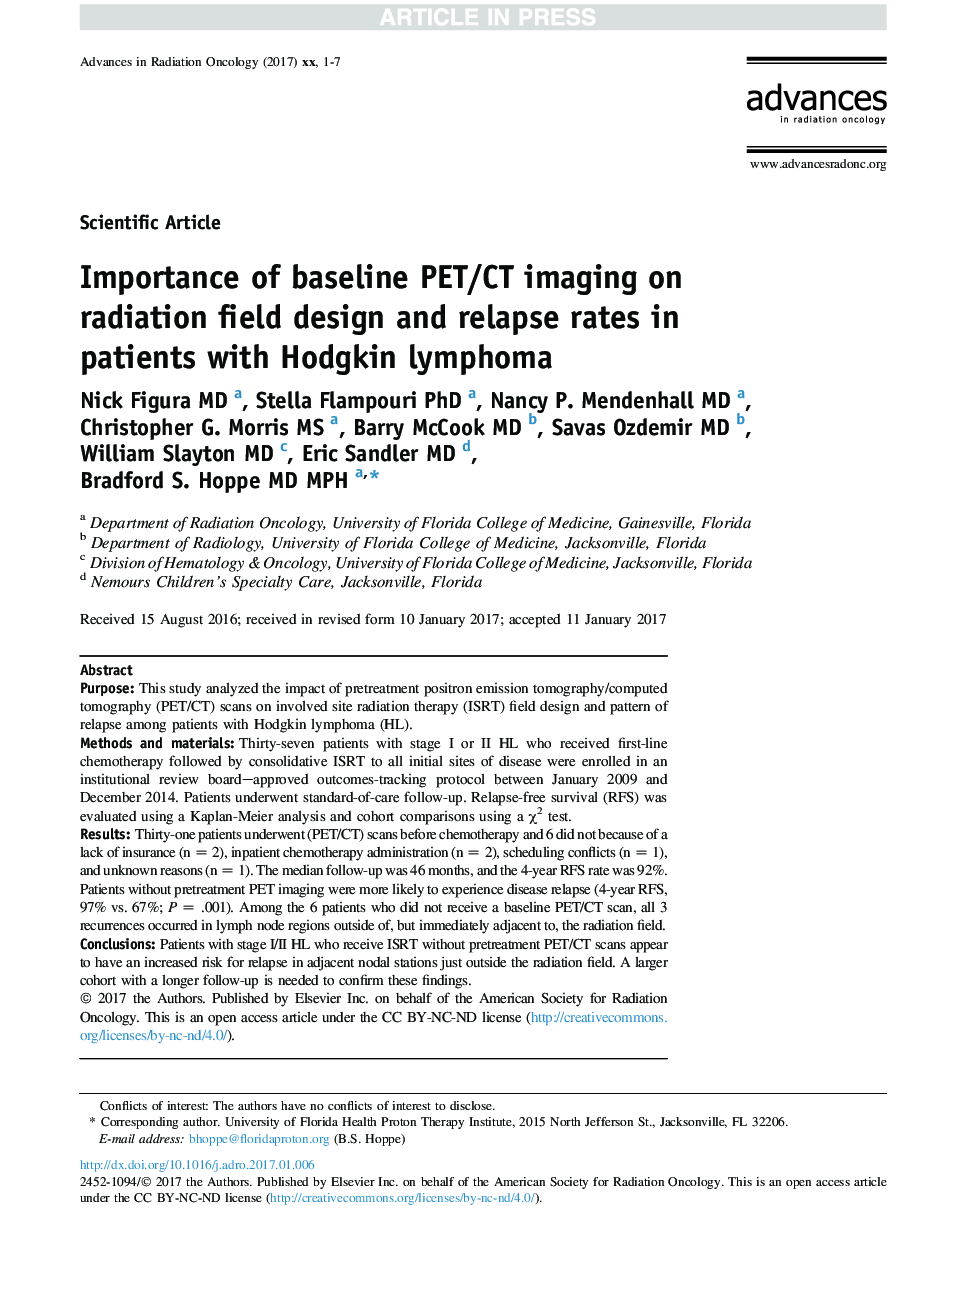 Importance of baseline PET/CT imaging on radiation field design and relapse rates in patients with Hodgkin lymphoma